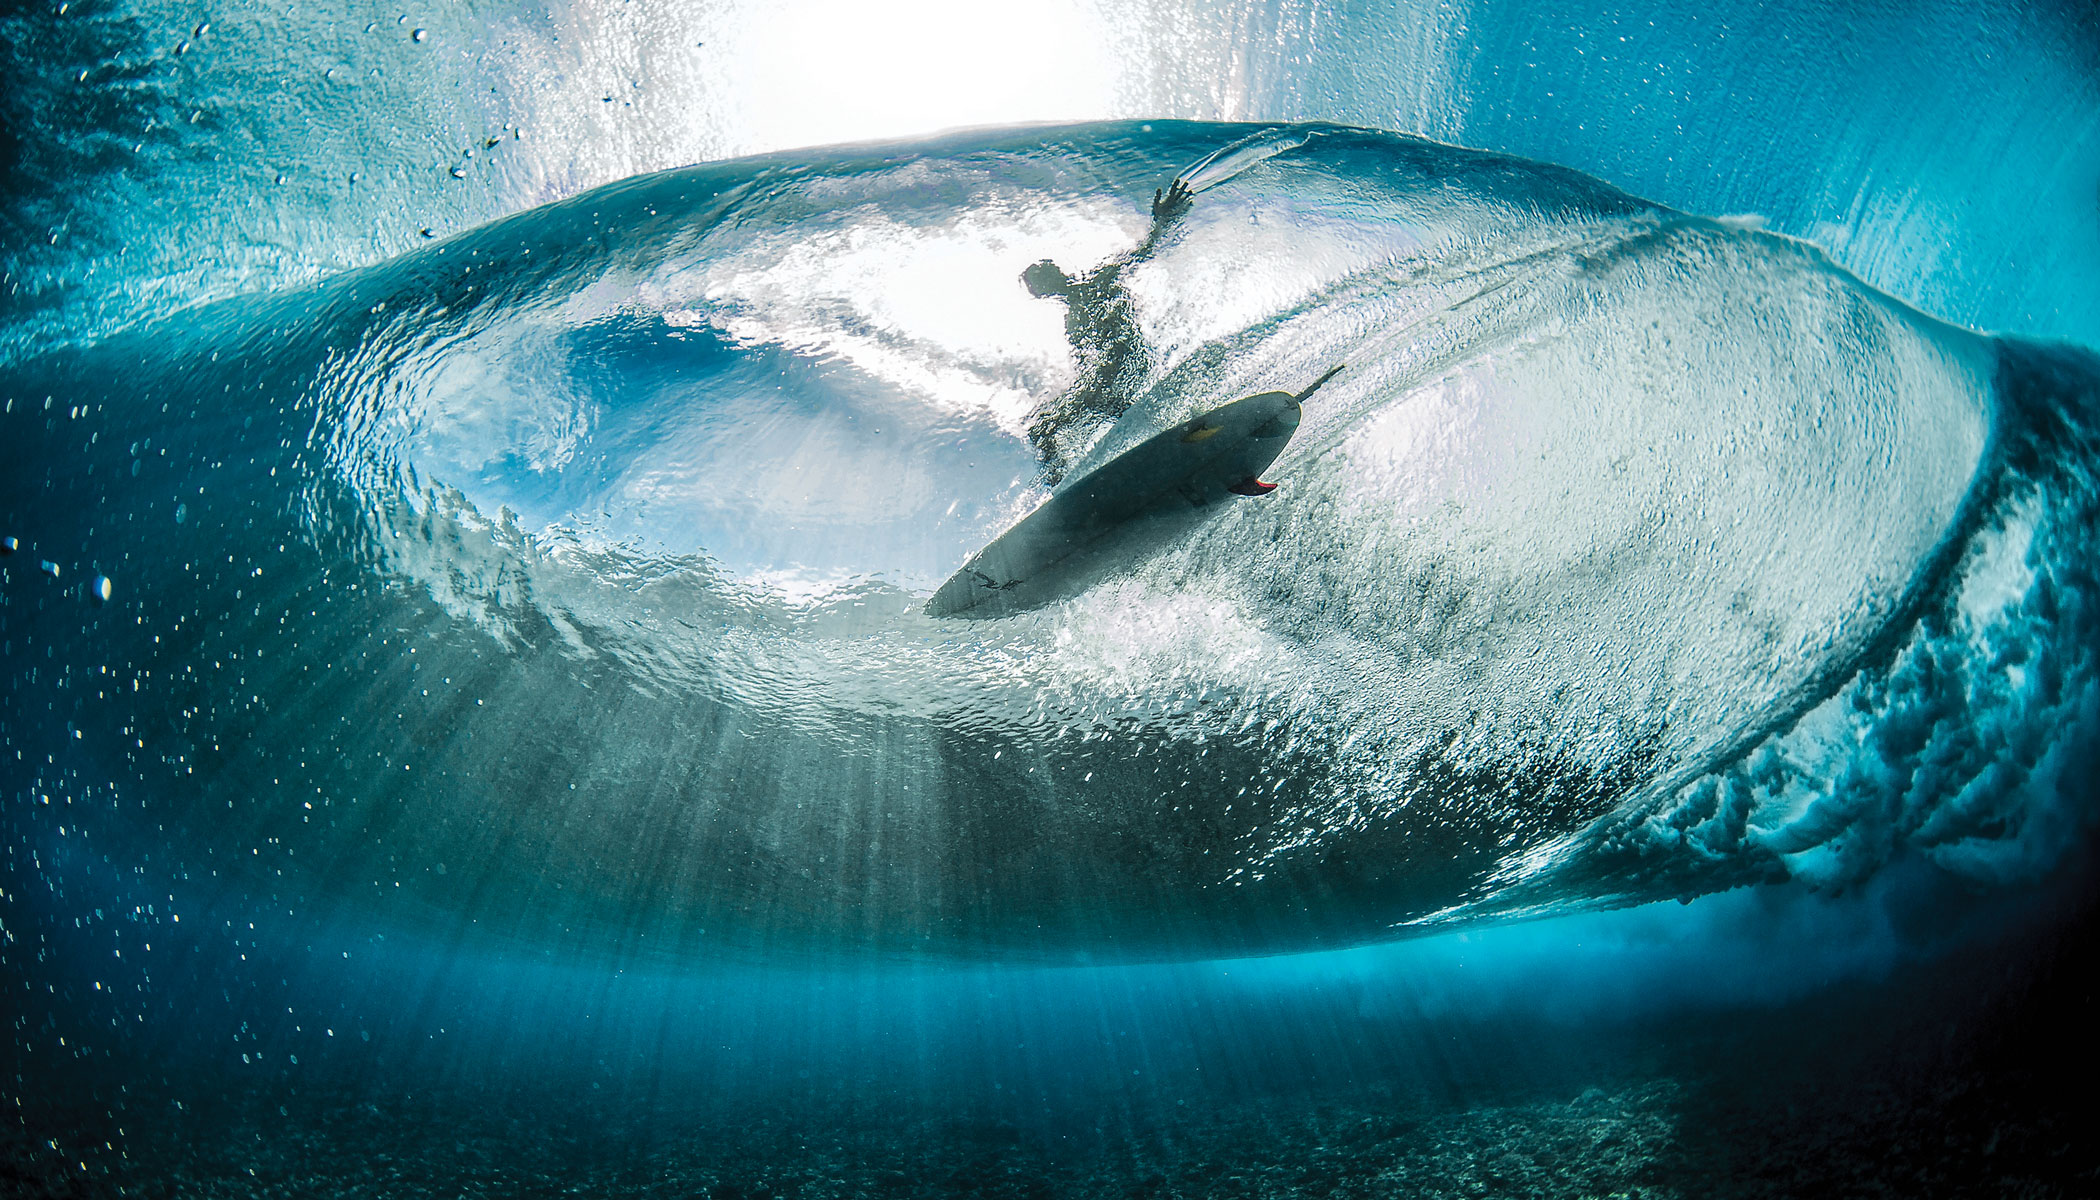 Ben Thouard photo of a surfer on shot from below and behind the wave